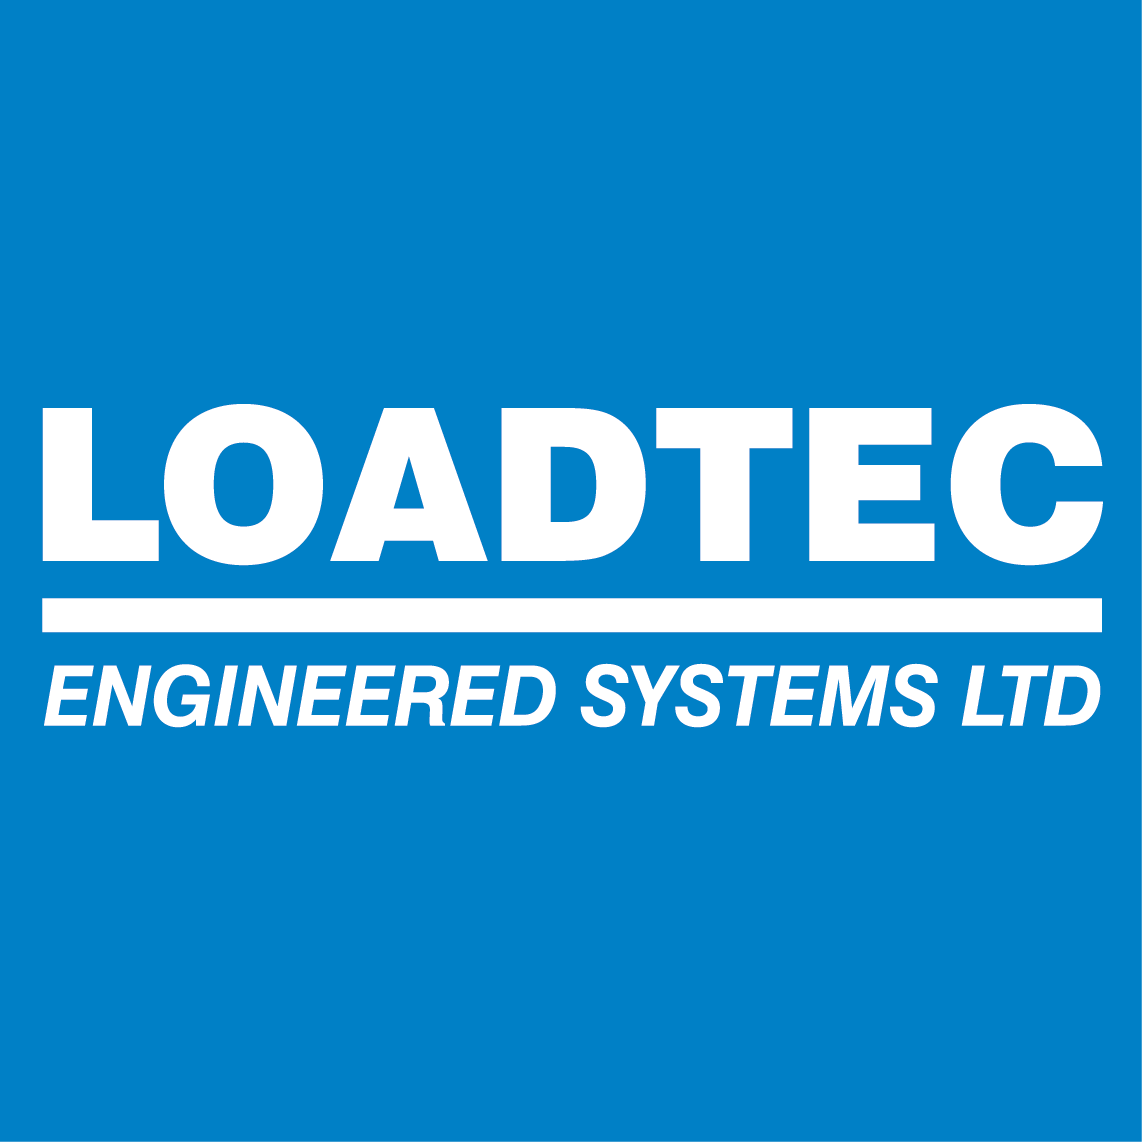 Loadtec Engineering has designed their very own robotic automated loading arm